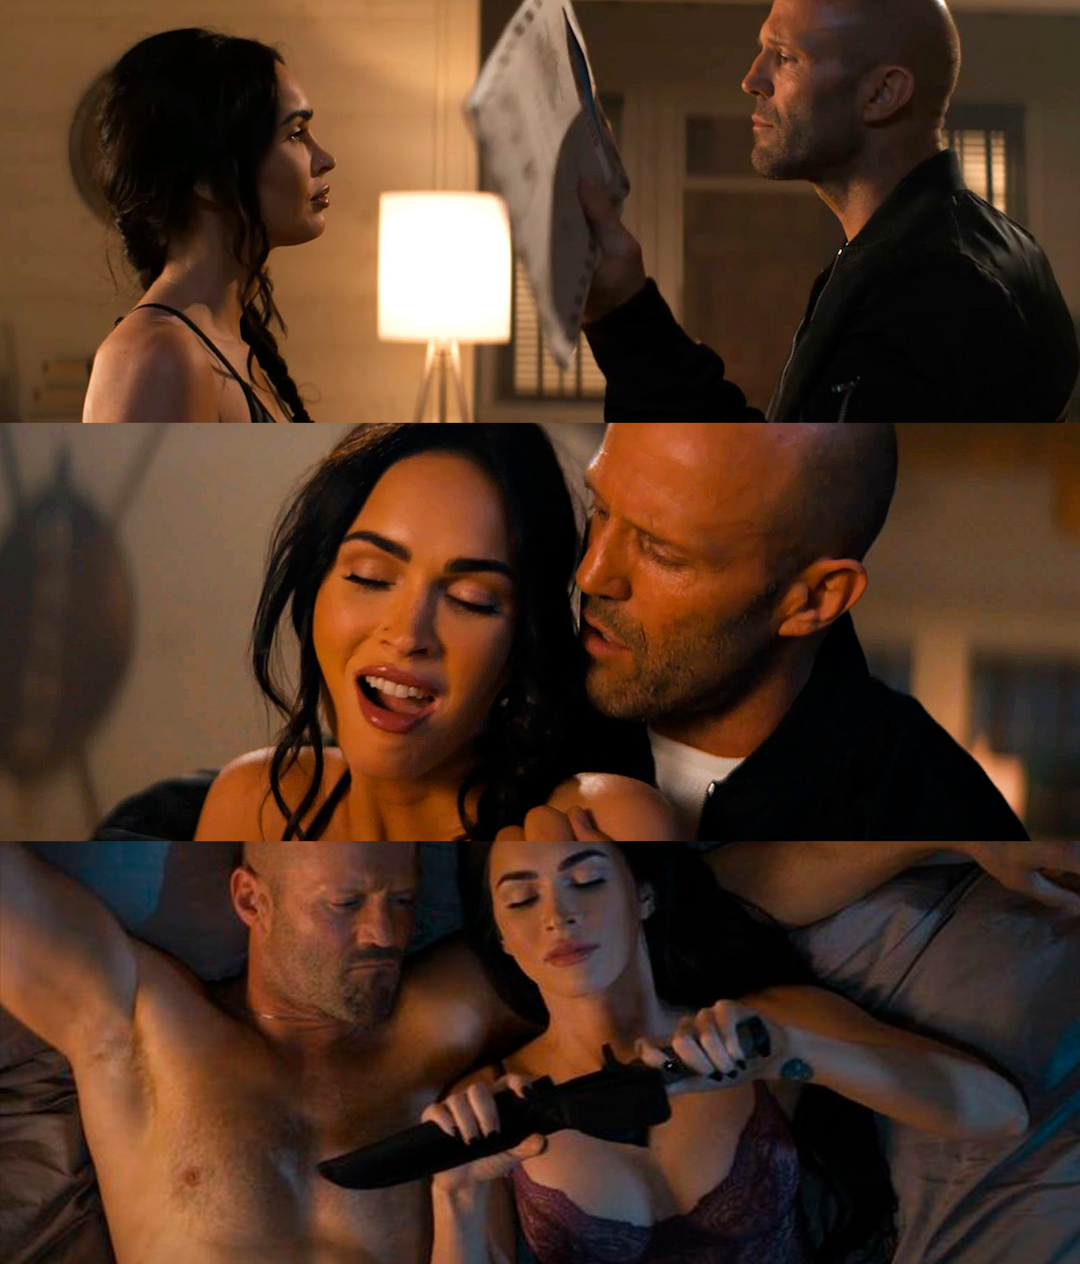 Megan Fox And Jason Statham Have A Hot Scene In Expendables 4 Video News 